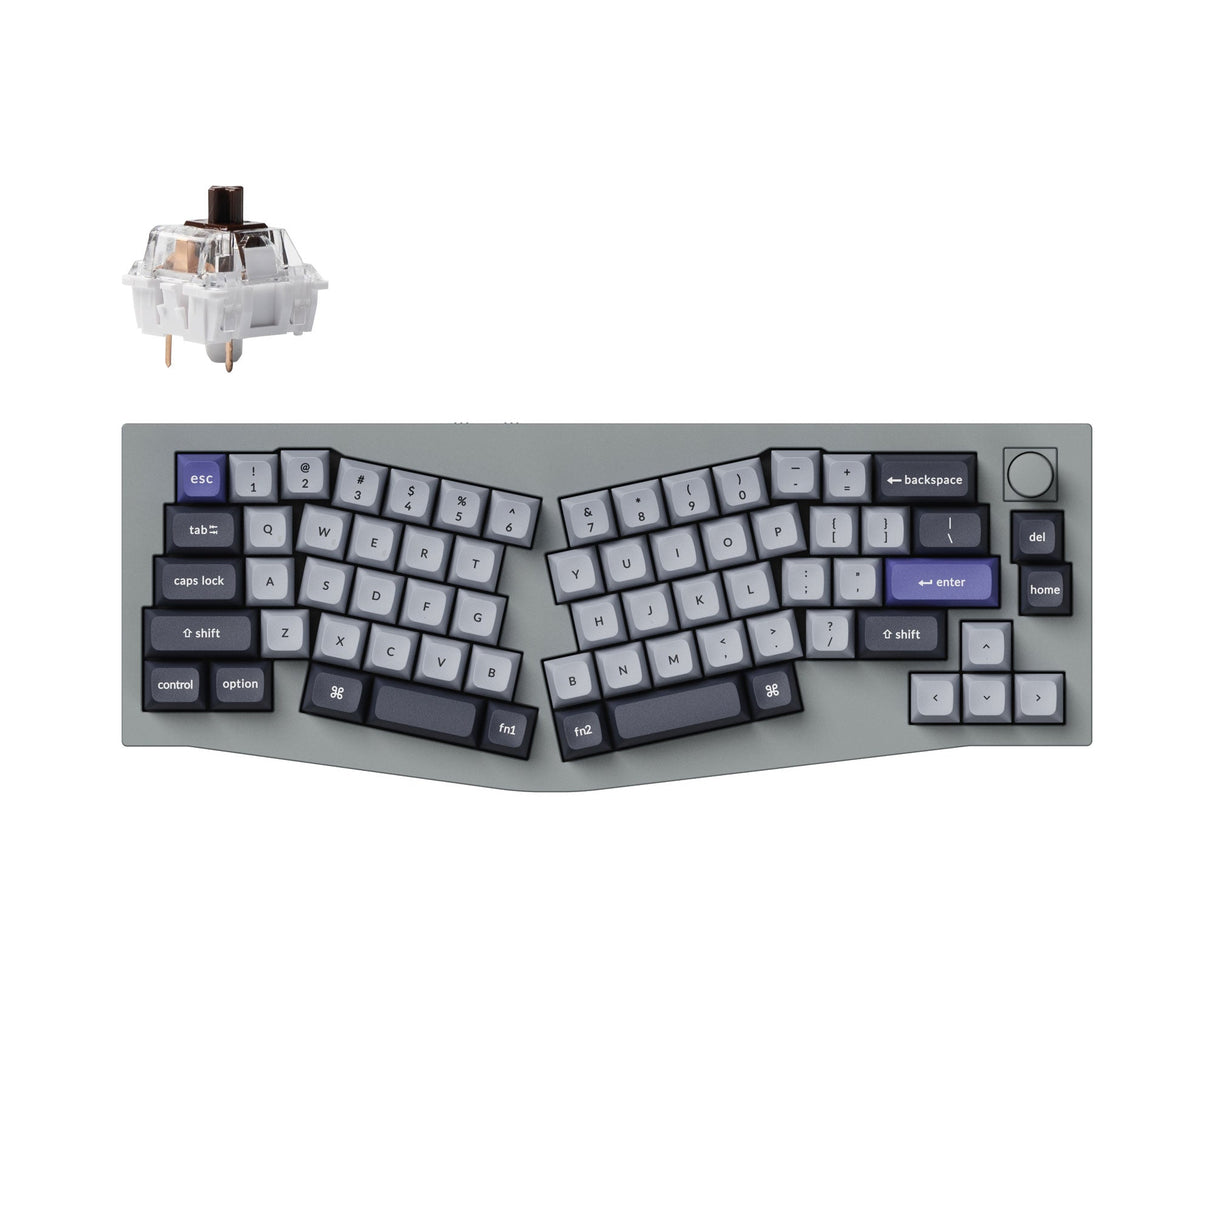 Keychron Q8 Pro QMK/VIA wireless custom mechanical keyboard 65 percent Alice layout full aluminum grey frame for Mac Windows Linux with RGB backlight hot-swappable K Pro brown